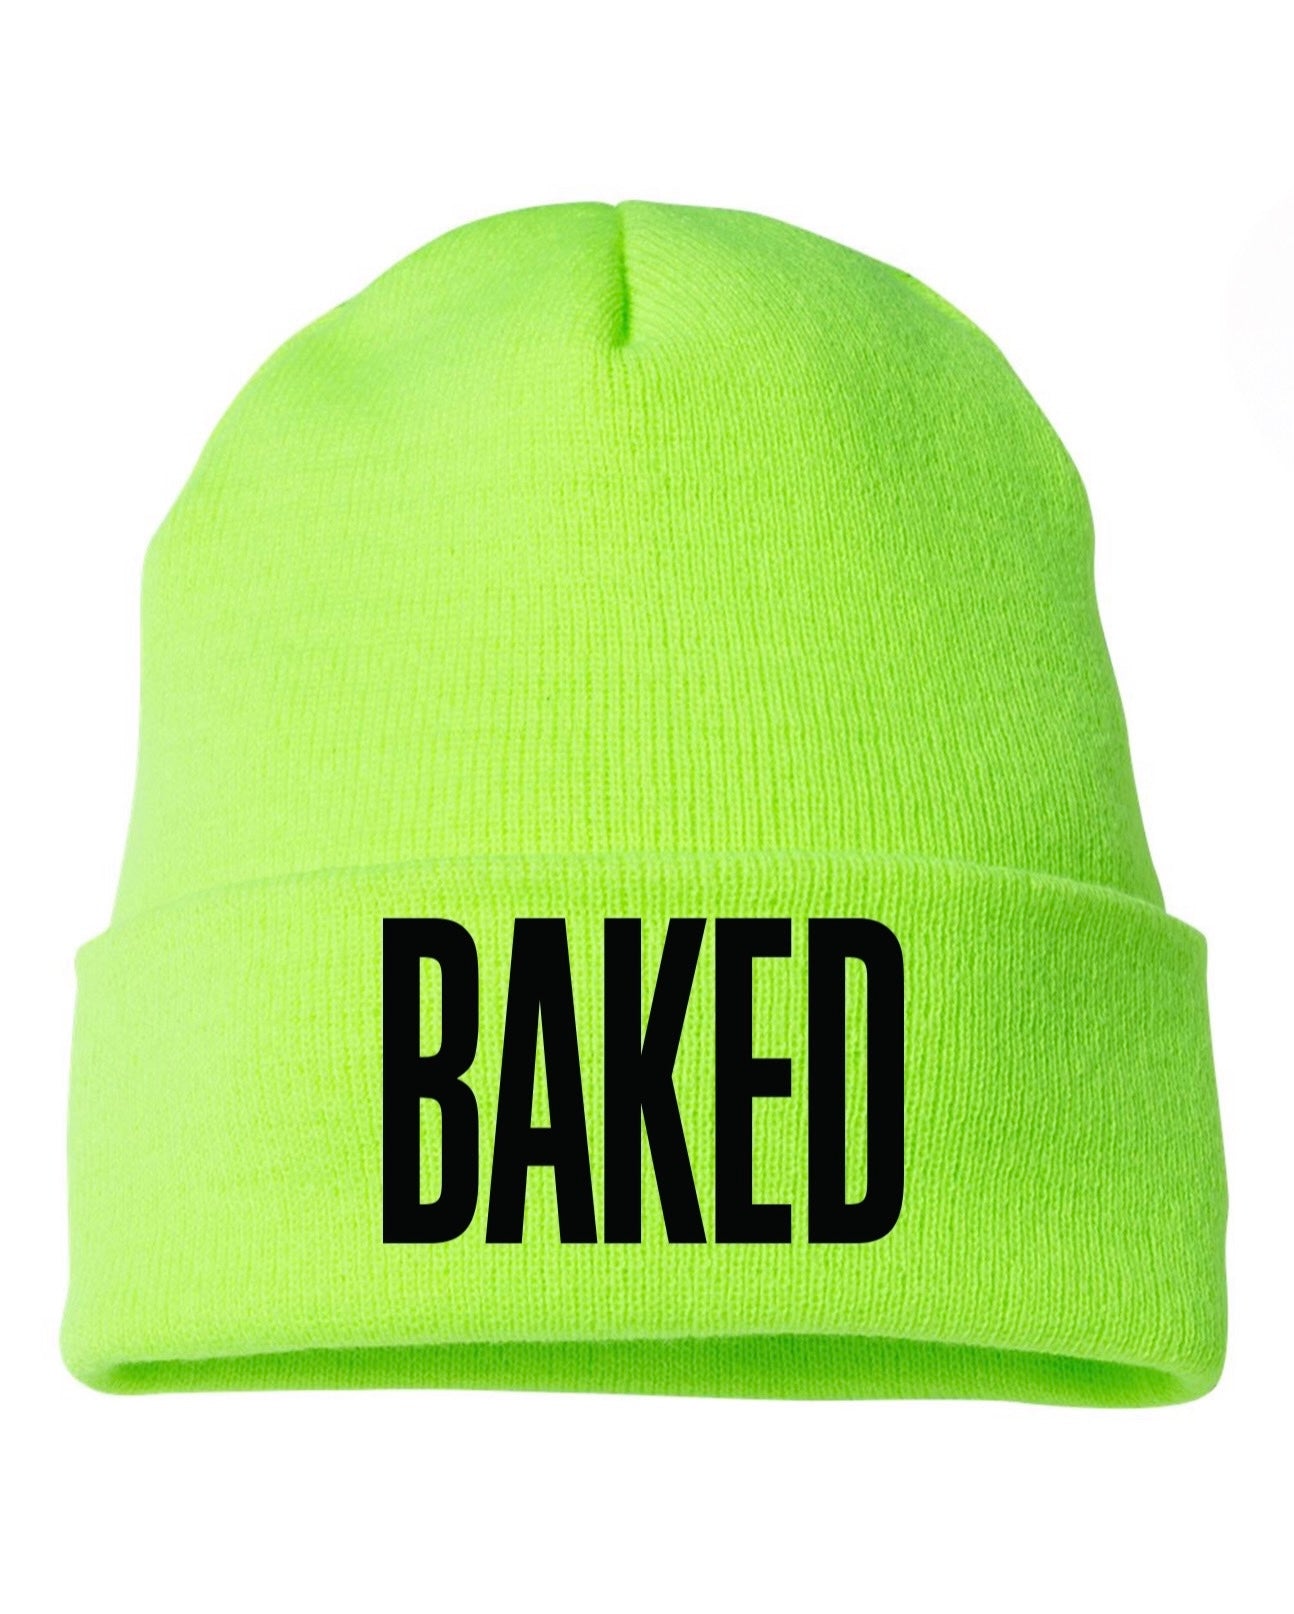 BAKED Beanie LIME Green